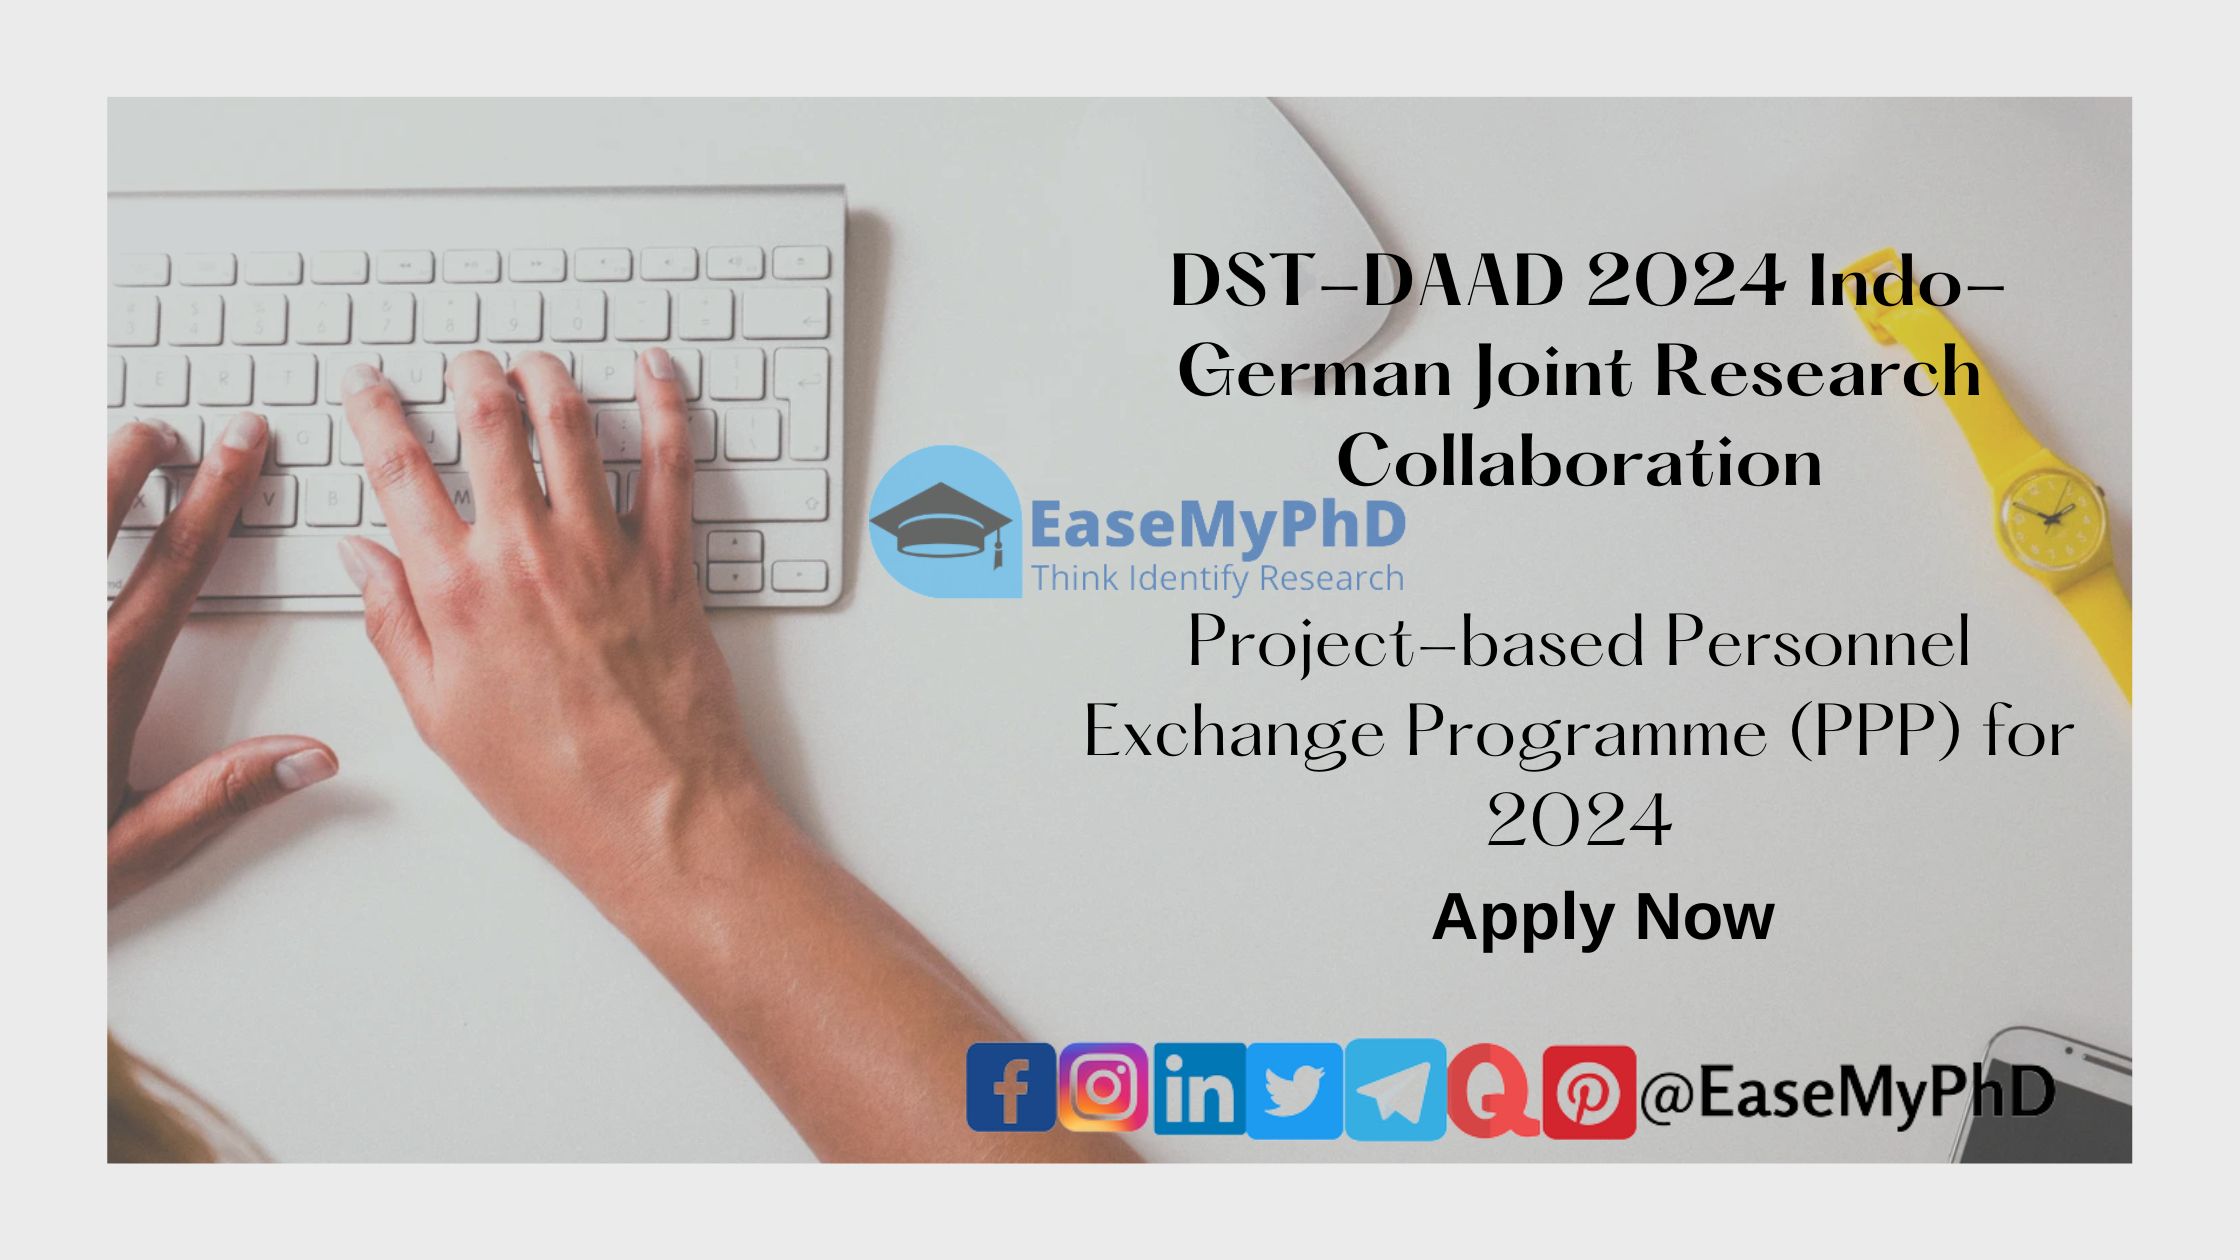 DST-DAAD 2024 Indo-German Joint Research Collaboration Project-based Personnel Exchange Programme (PPP) for 2024